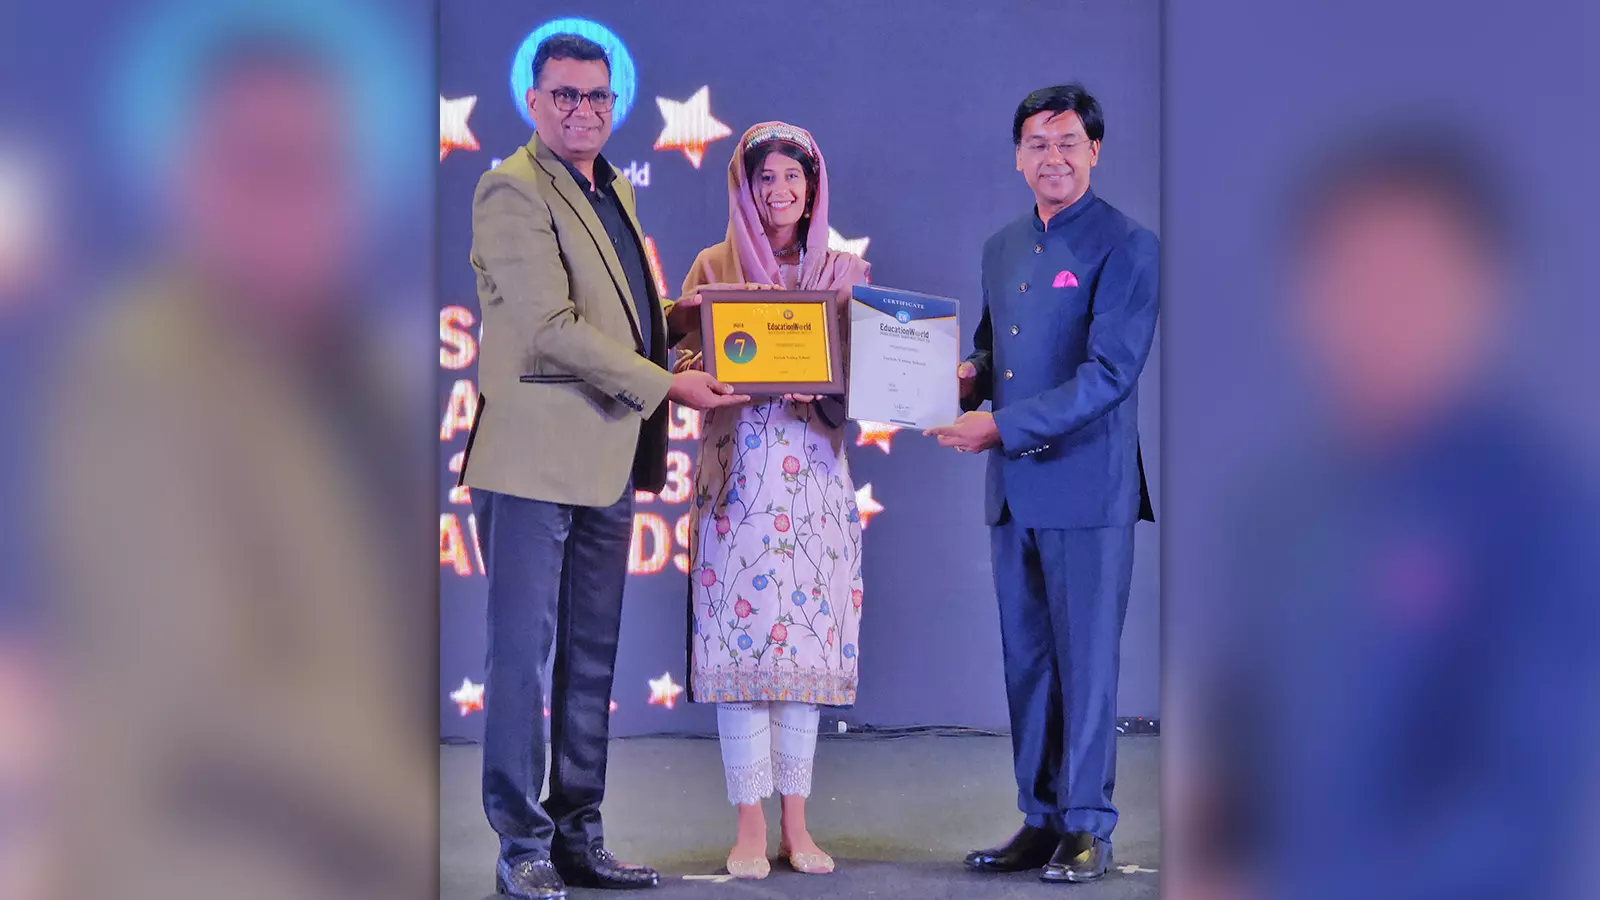 Sarah Shah accepting the award from Education World of India for Philanthropic Activities.